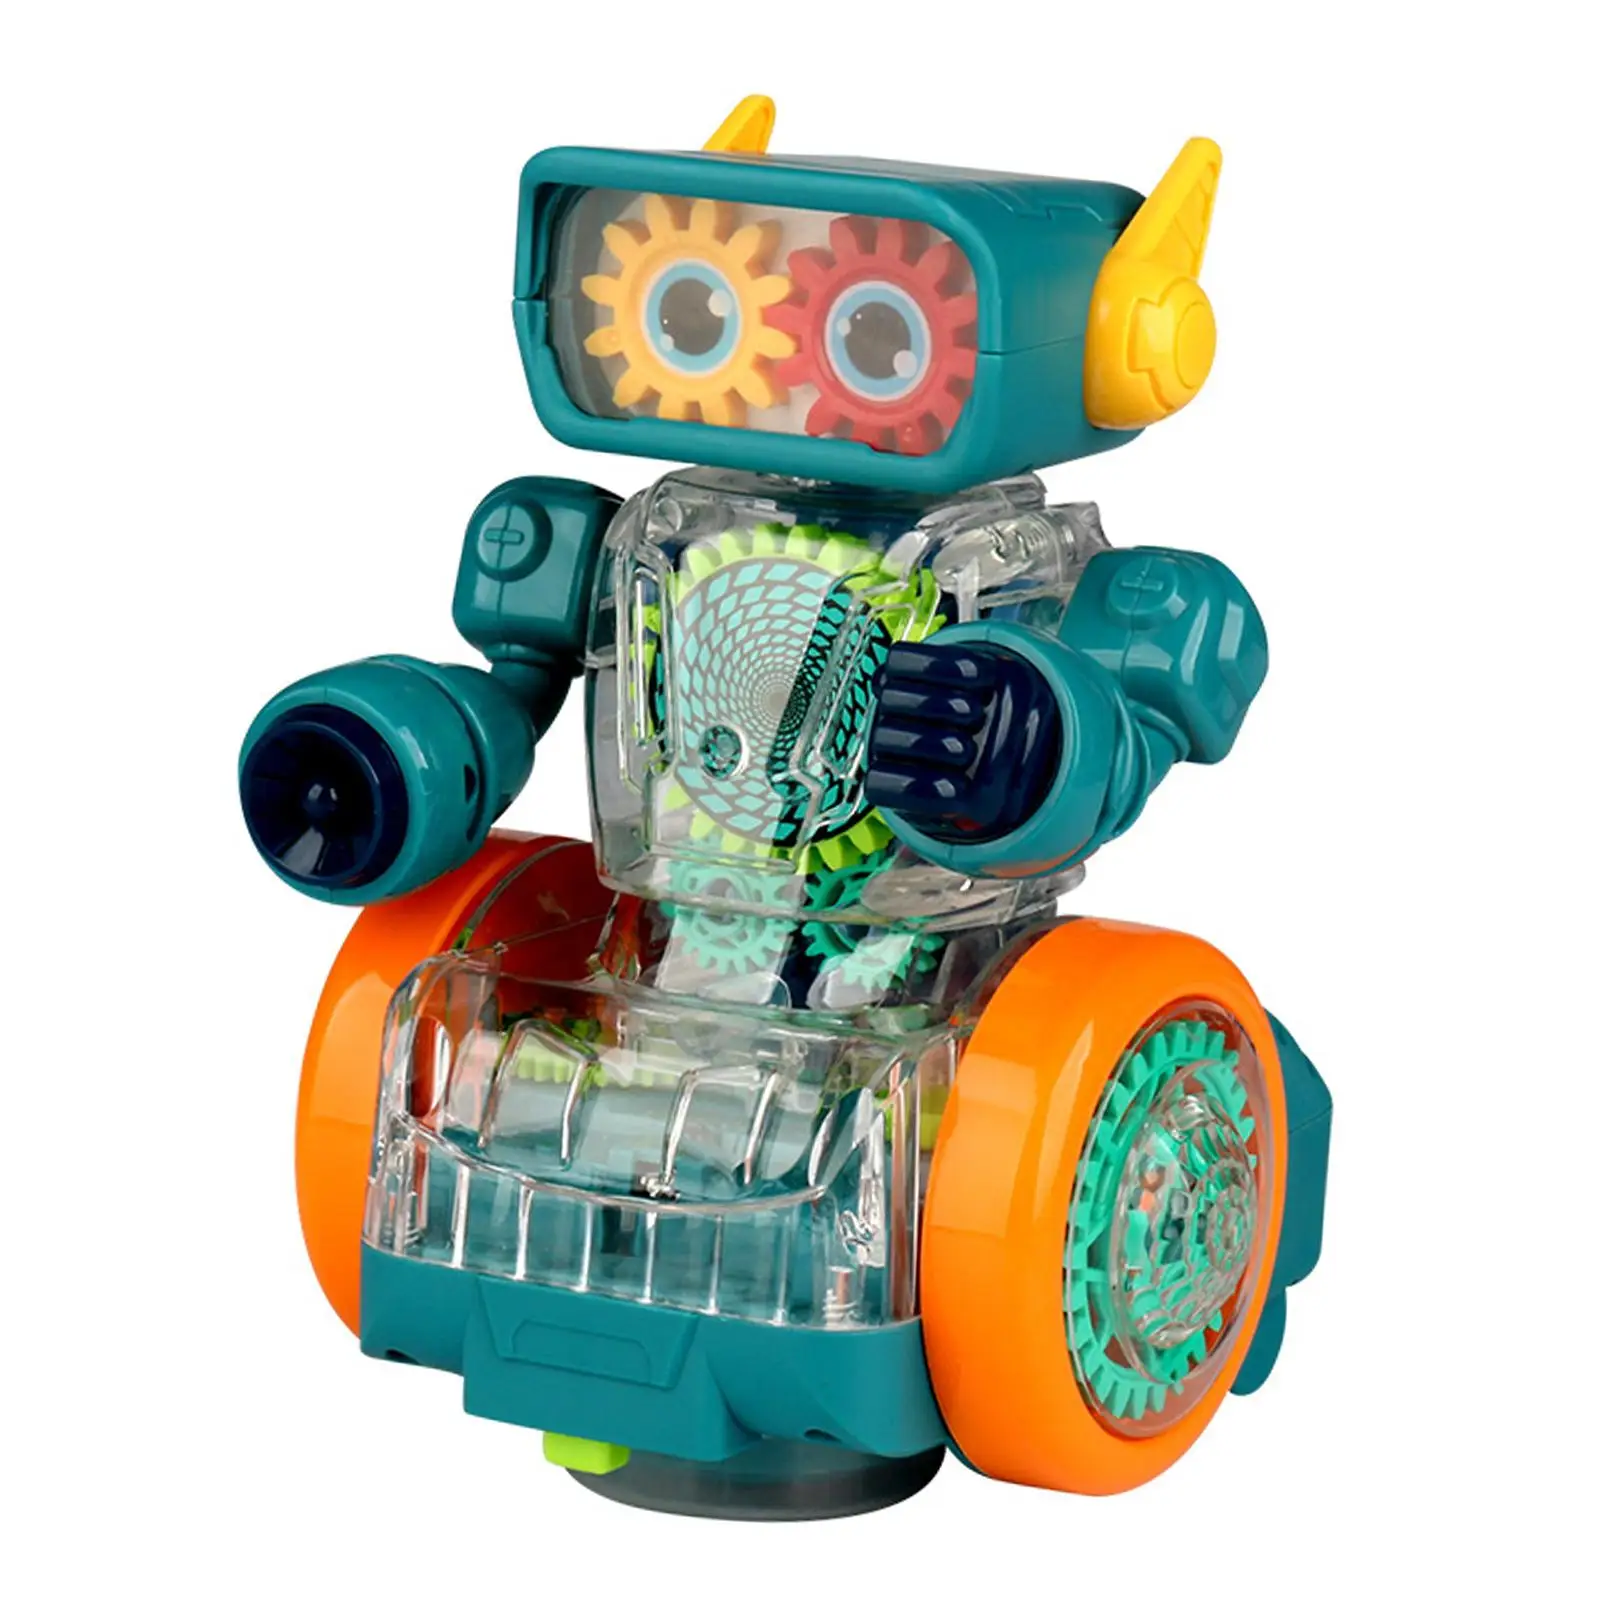 Mechanical Gear Robot Toy with Lighting with Moving Gears for Holiday Gifts